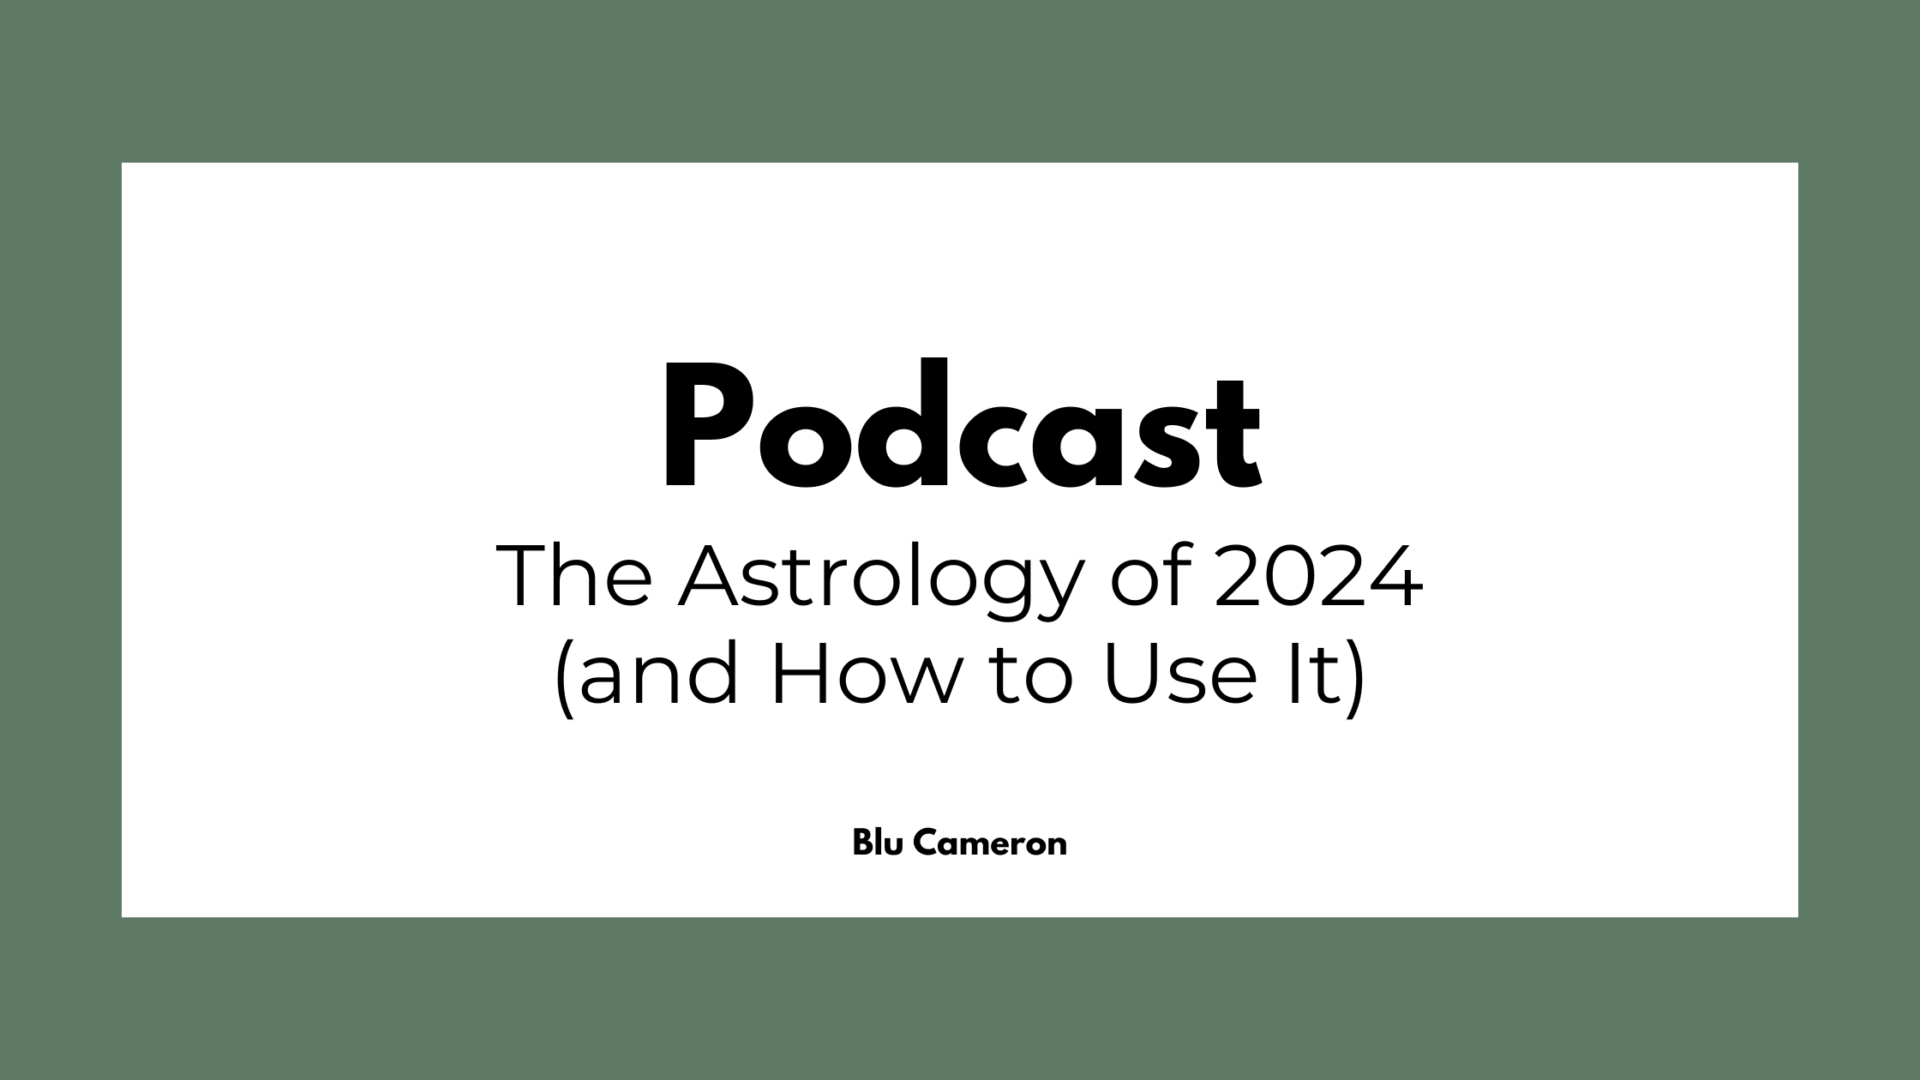 Black text against a white background with a green border reads: "The Astrology of 2024 (and How to Use It)"